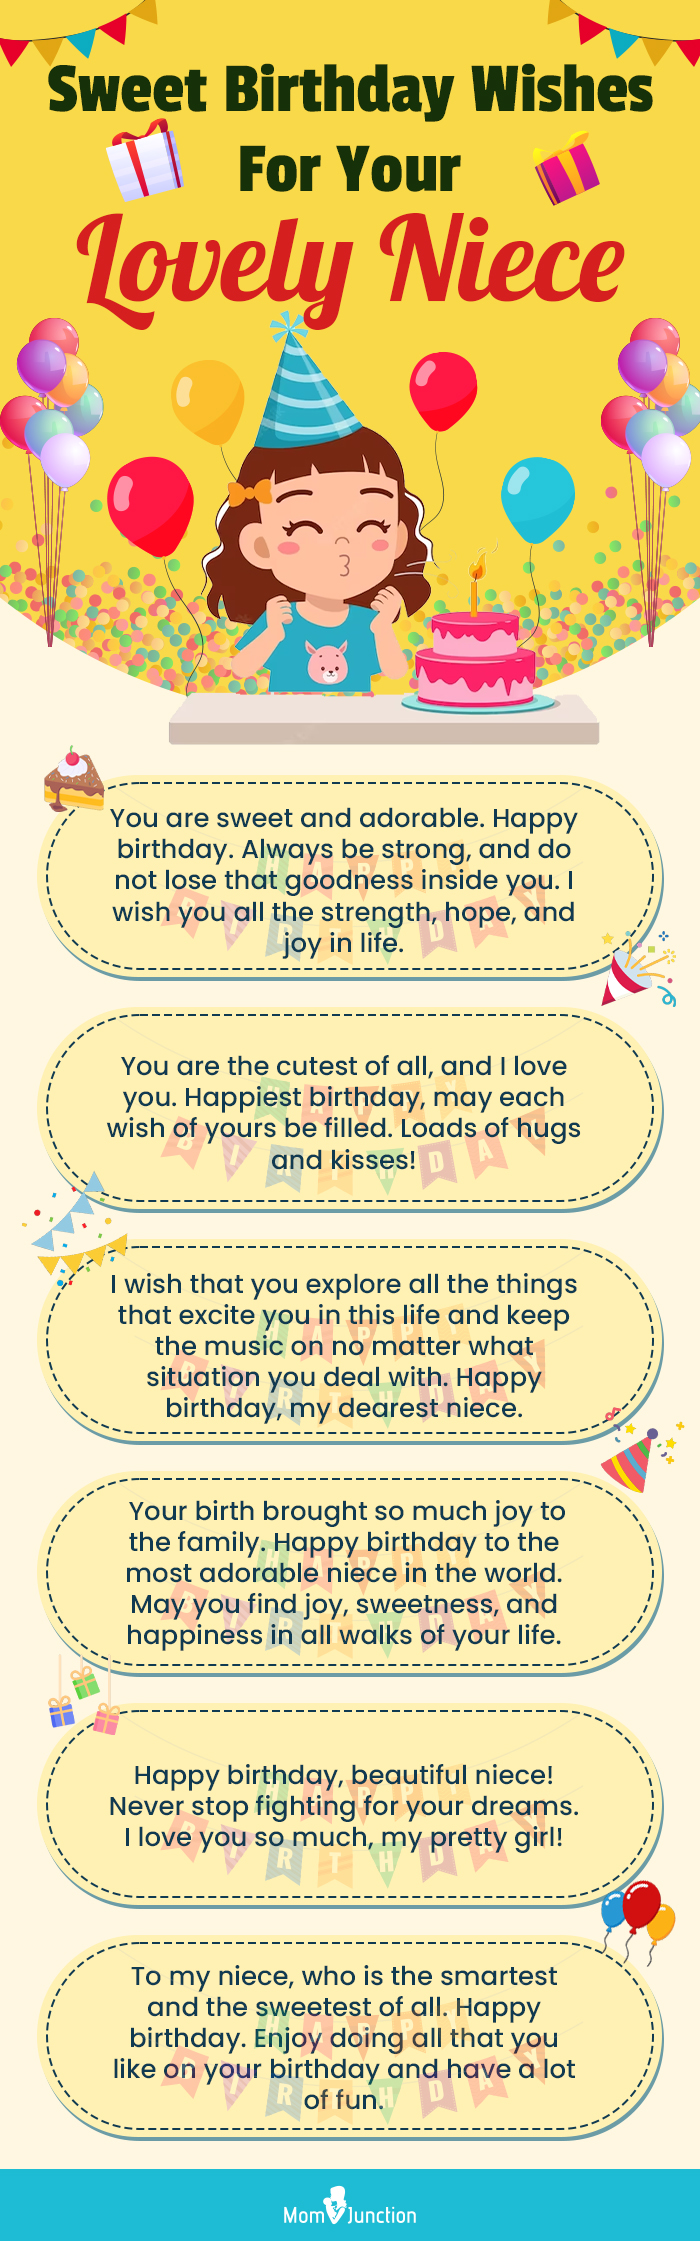 Things You Never Knew About the Happy Birthday Song